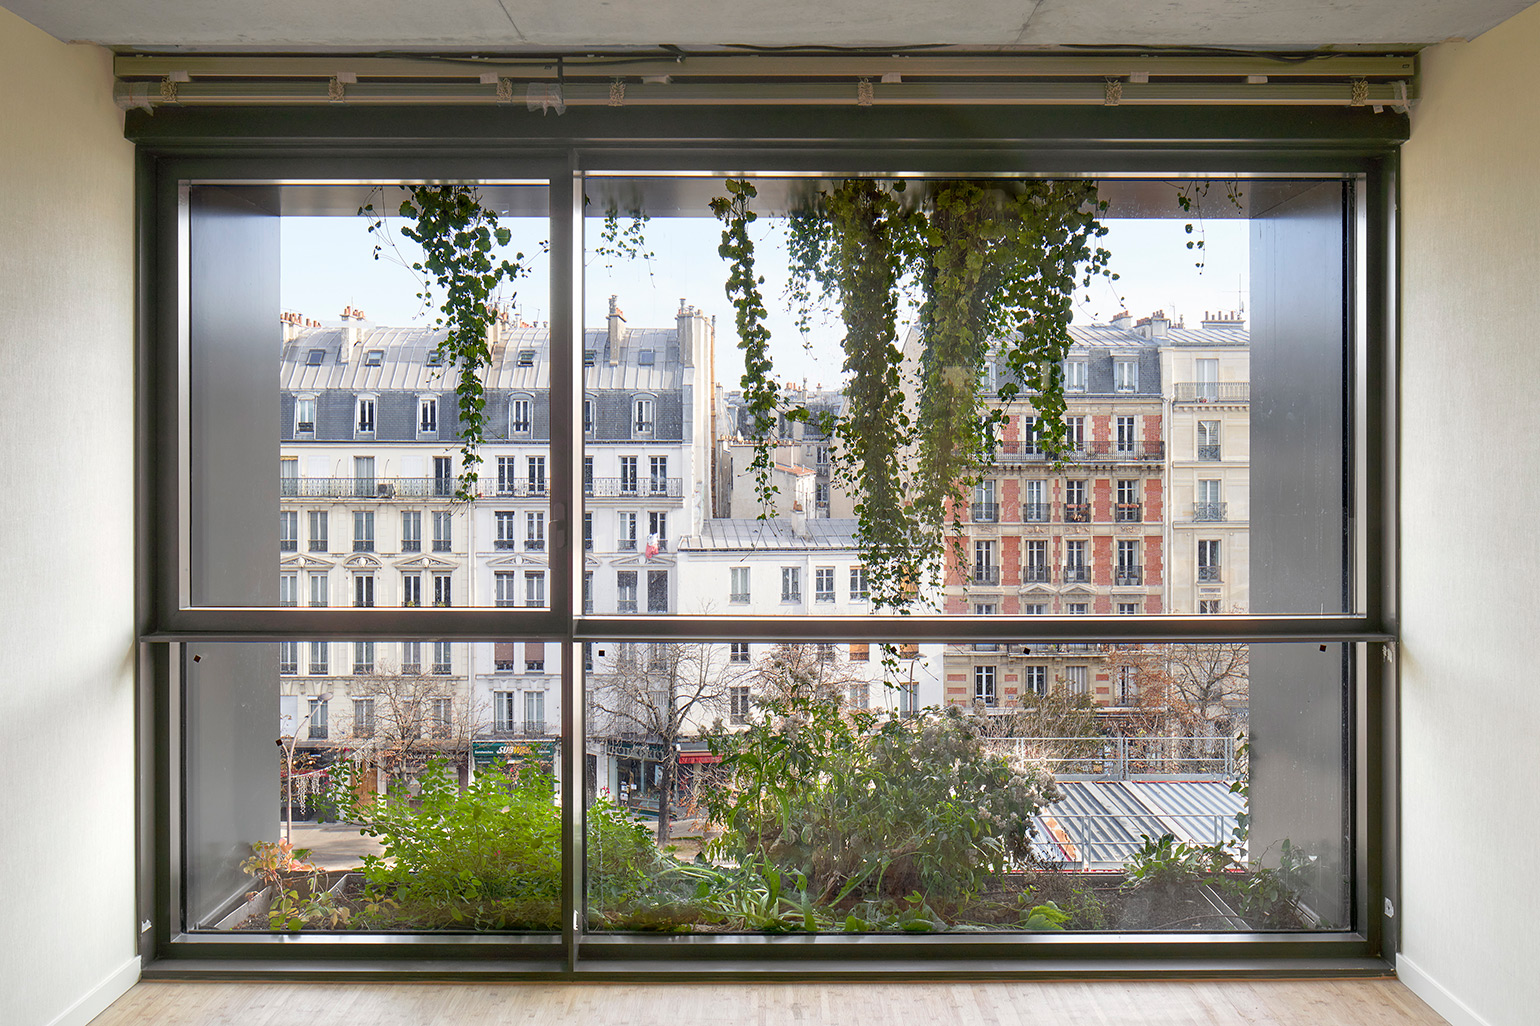 Triptyque Architecture + Philippe Starck Designed Green Mixed-Use Complex in Paris